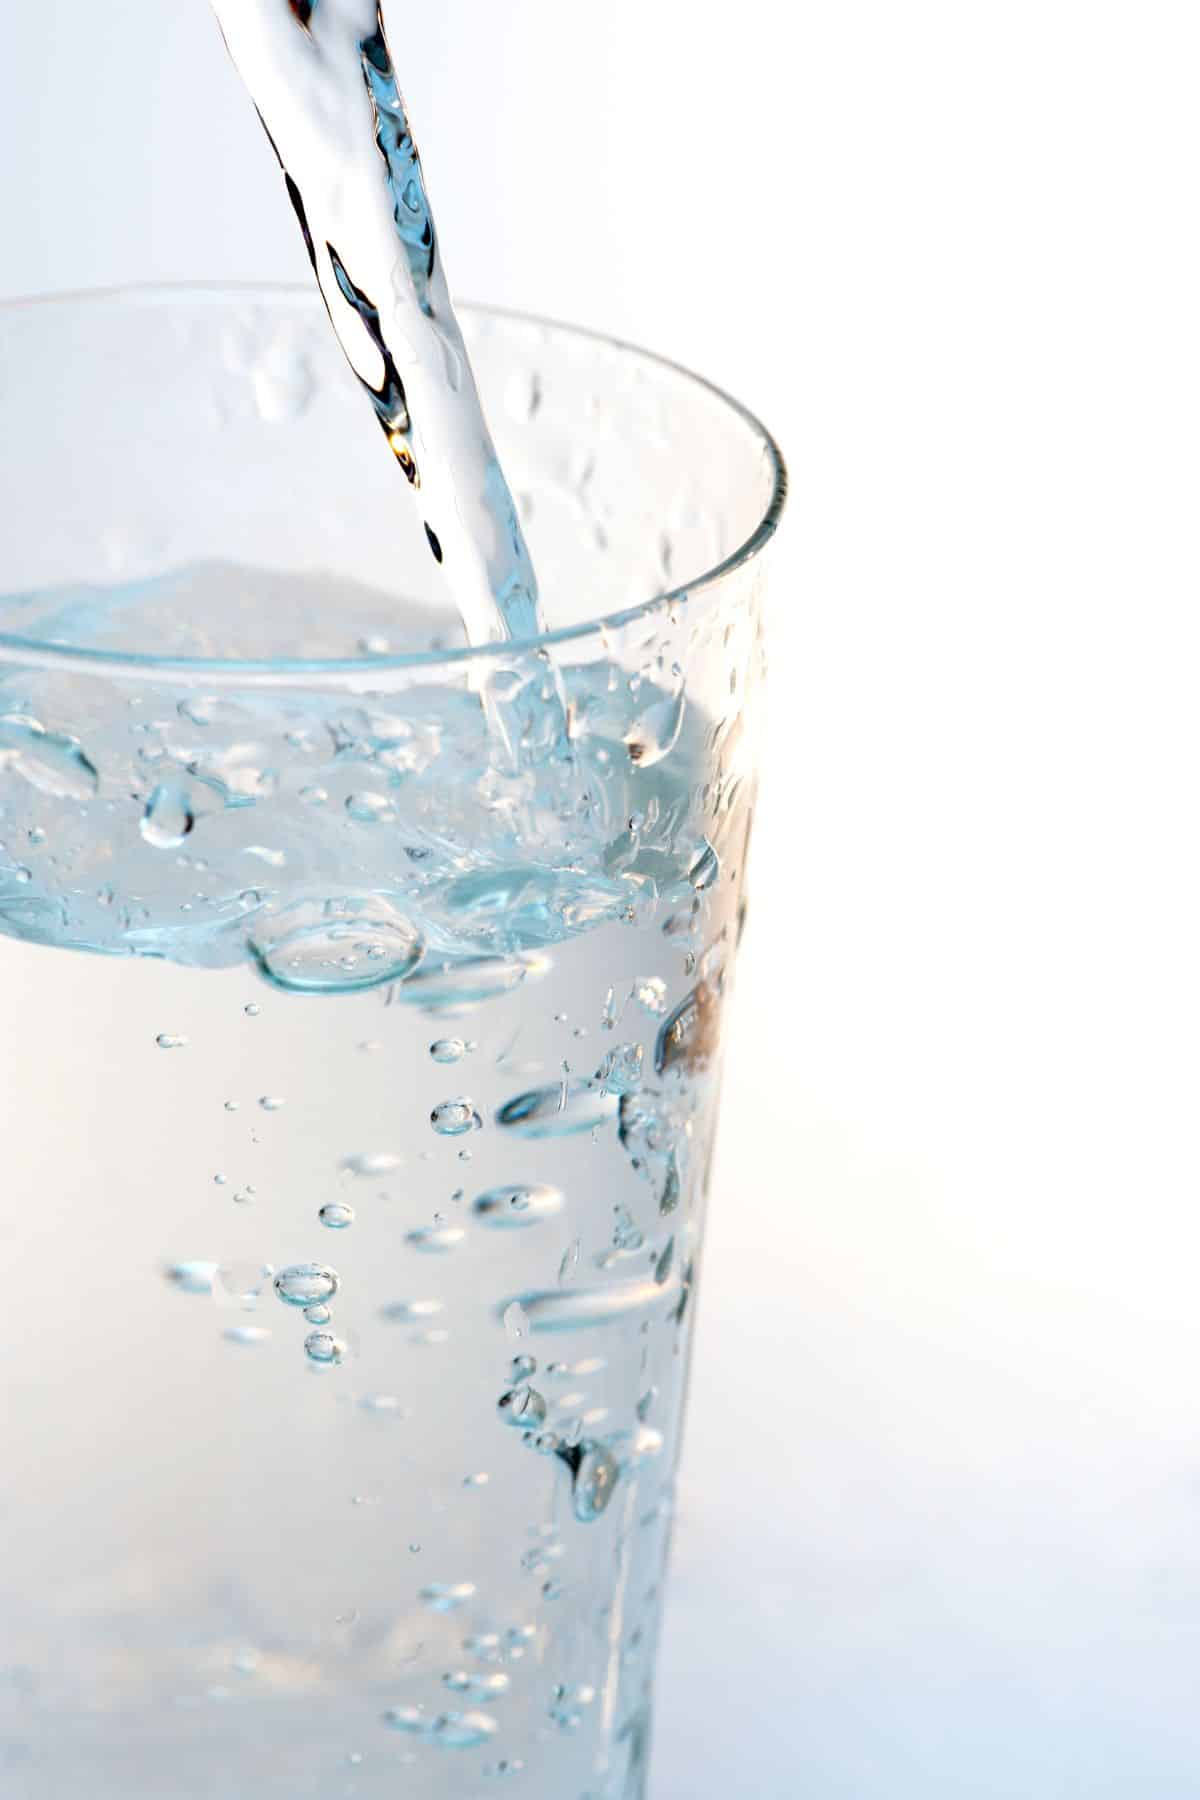 Distilled Water Nutrition Facts and Health Benefits